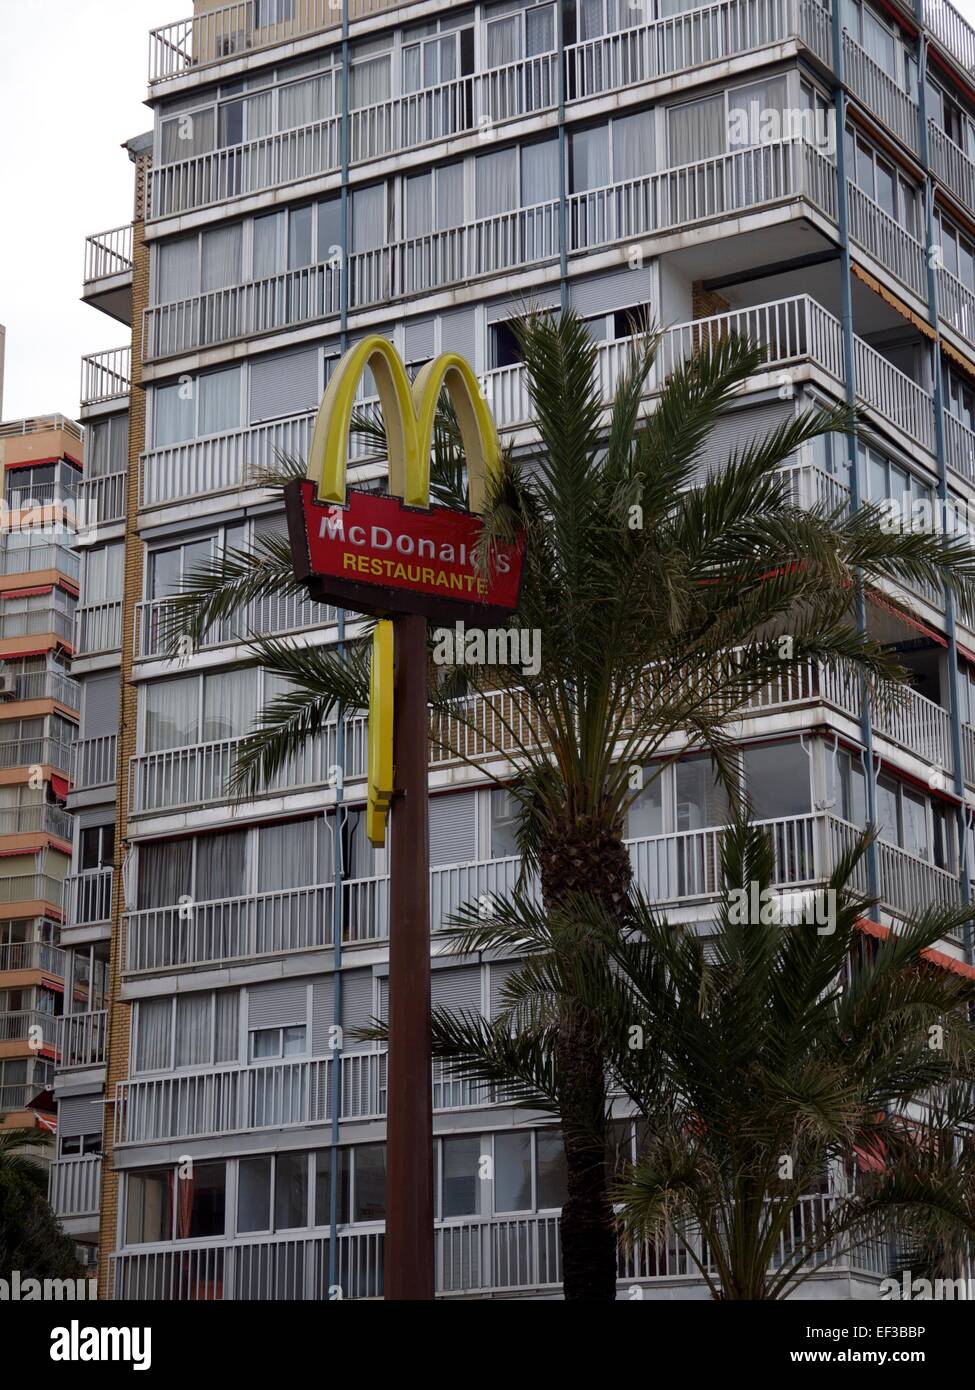 McDonalds sign in front of Palm trees and a apartment building Stock Photo